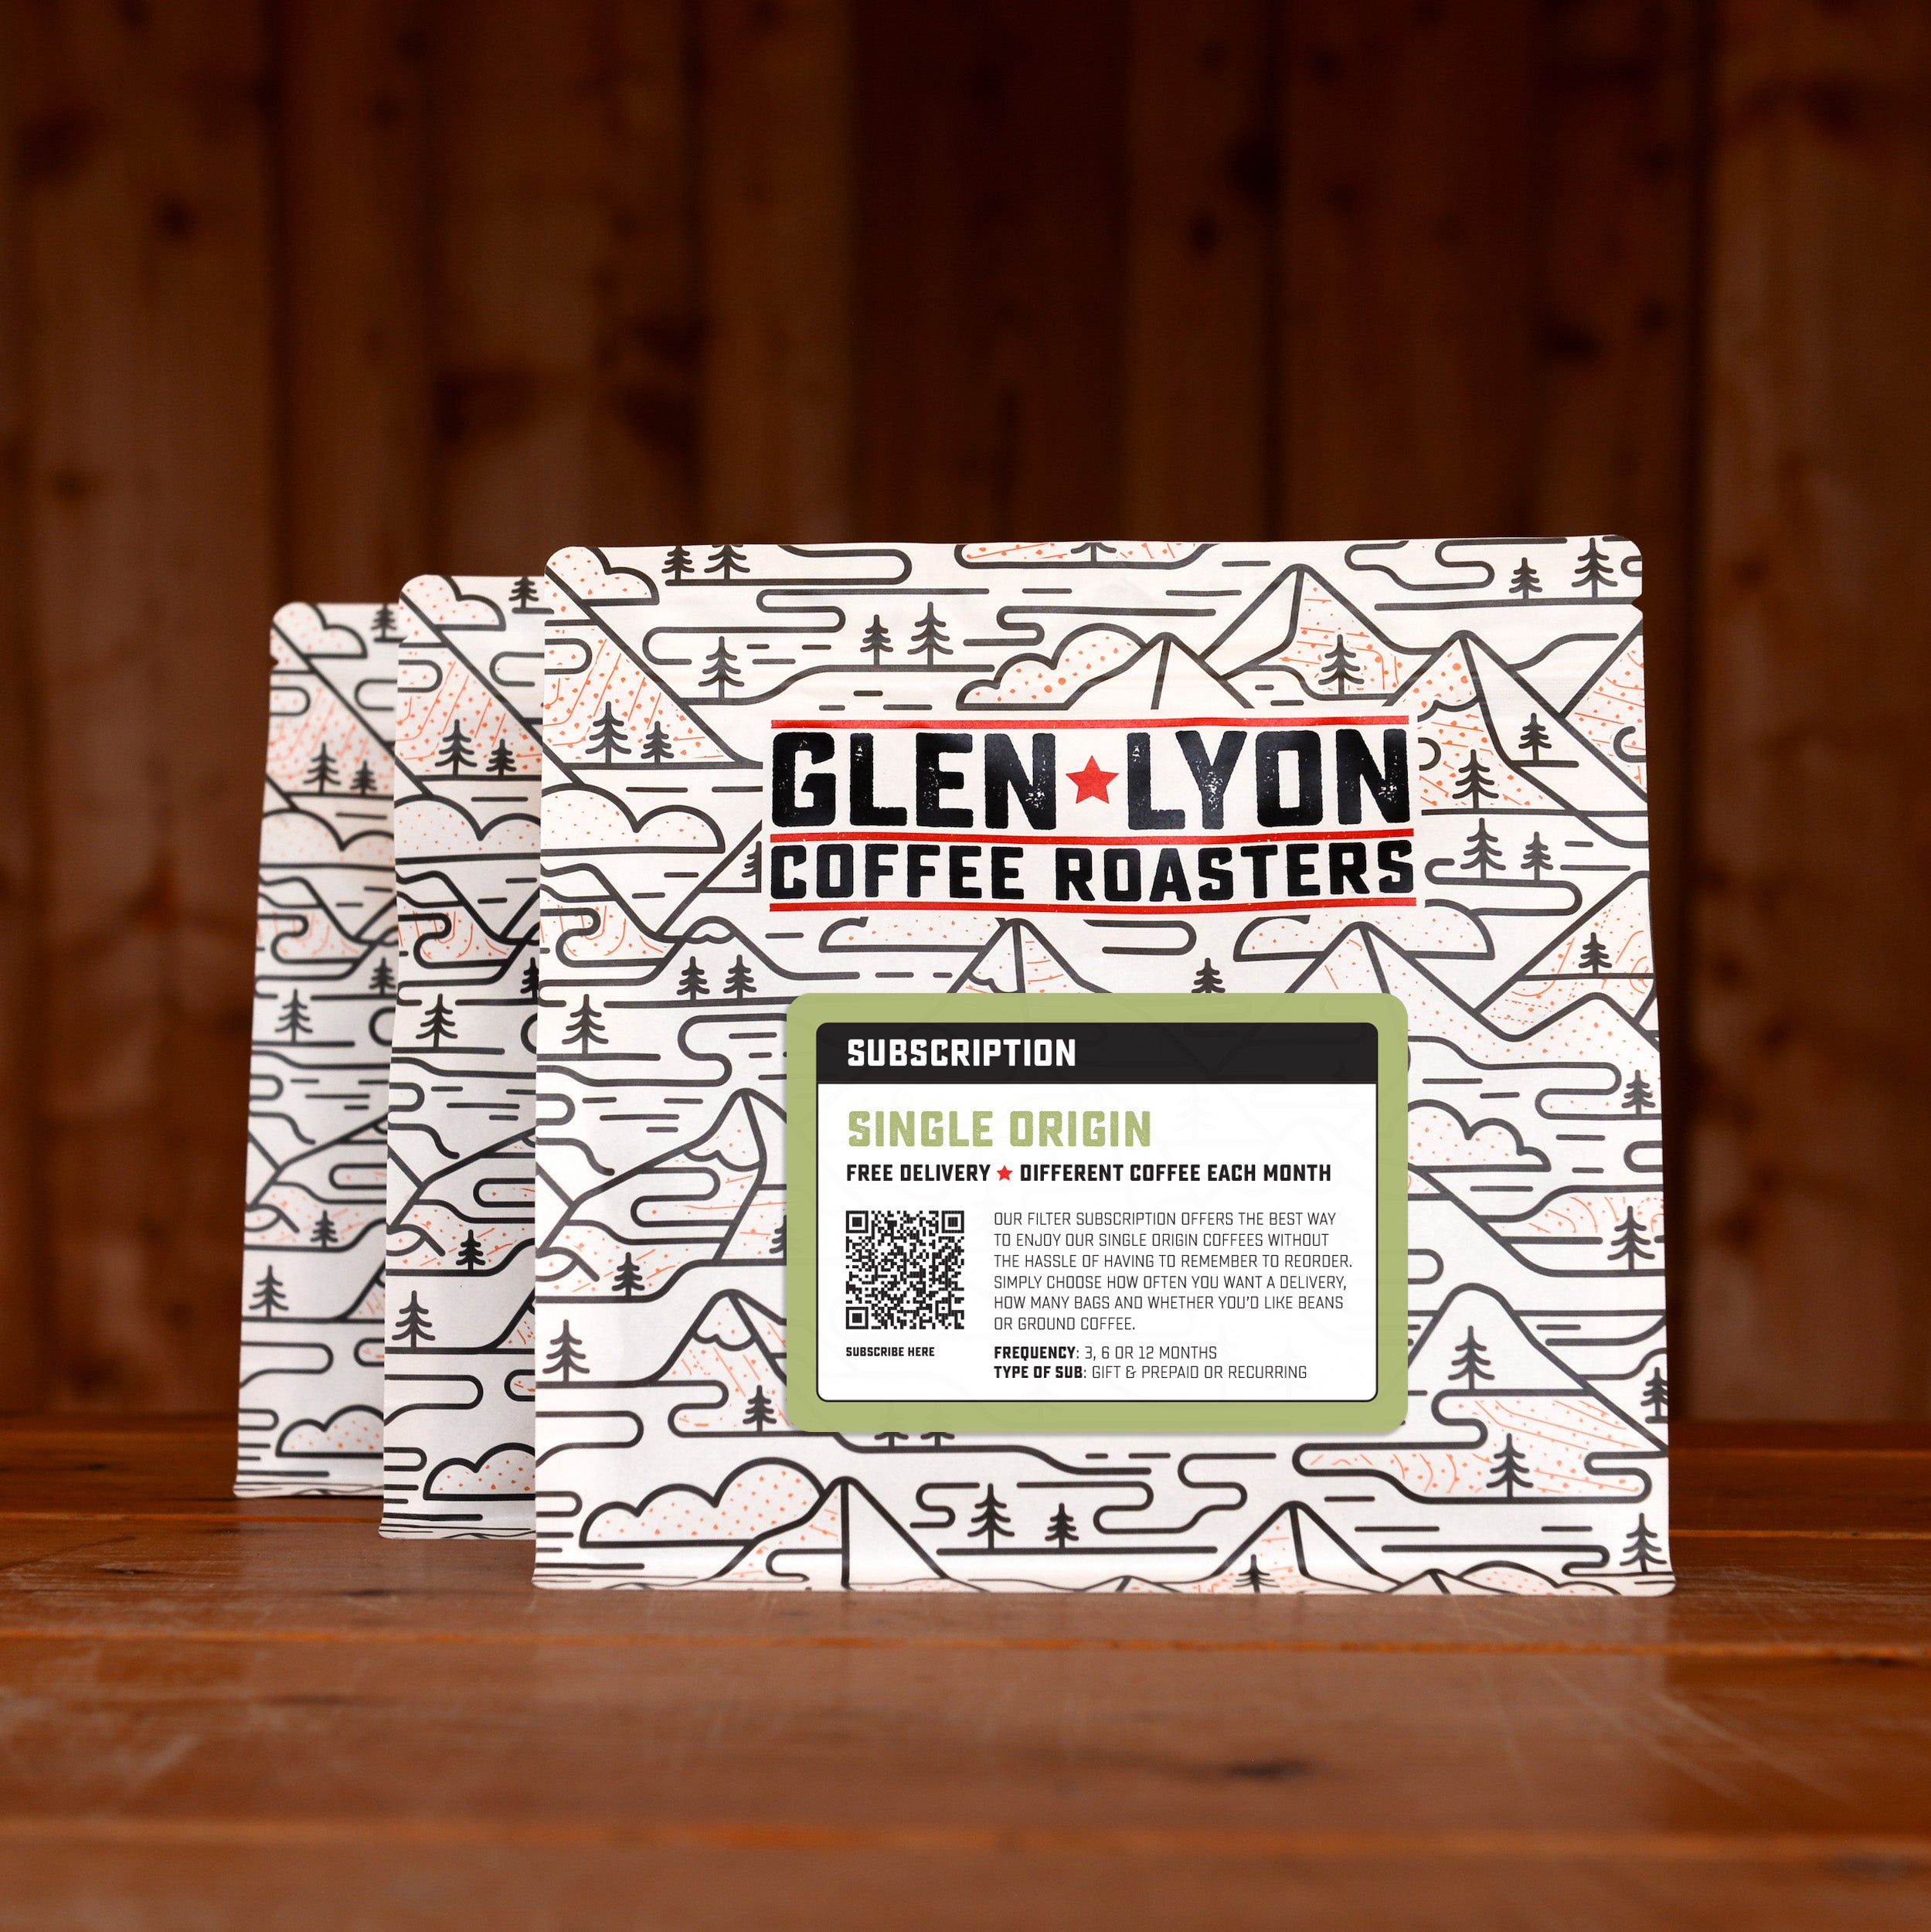 3 bags of Single Origin subscription labelled speciality coffee from Glen Lyon Coffee Roasters against a warm wood-tinged background